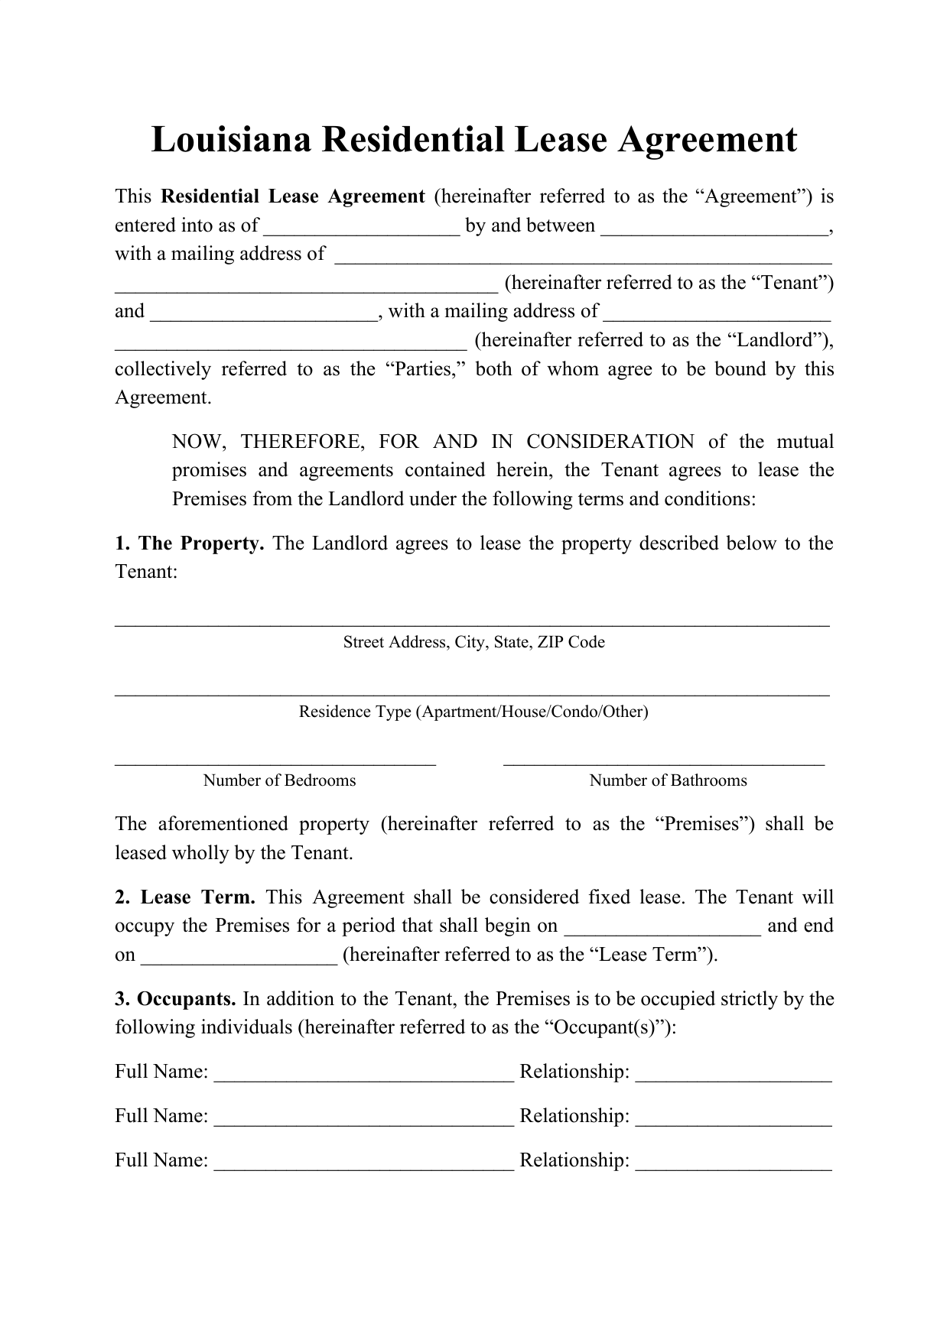 louisiana-residential-lease-agreement-template-fill-out-sign-online-and-download-pdf